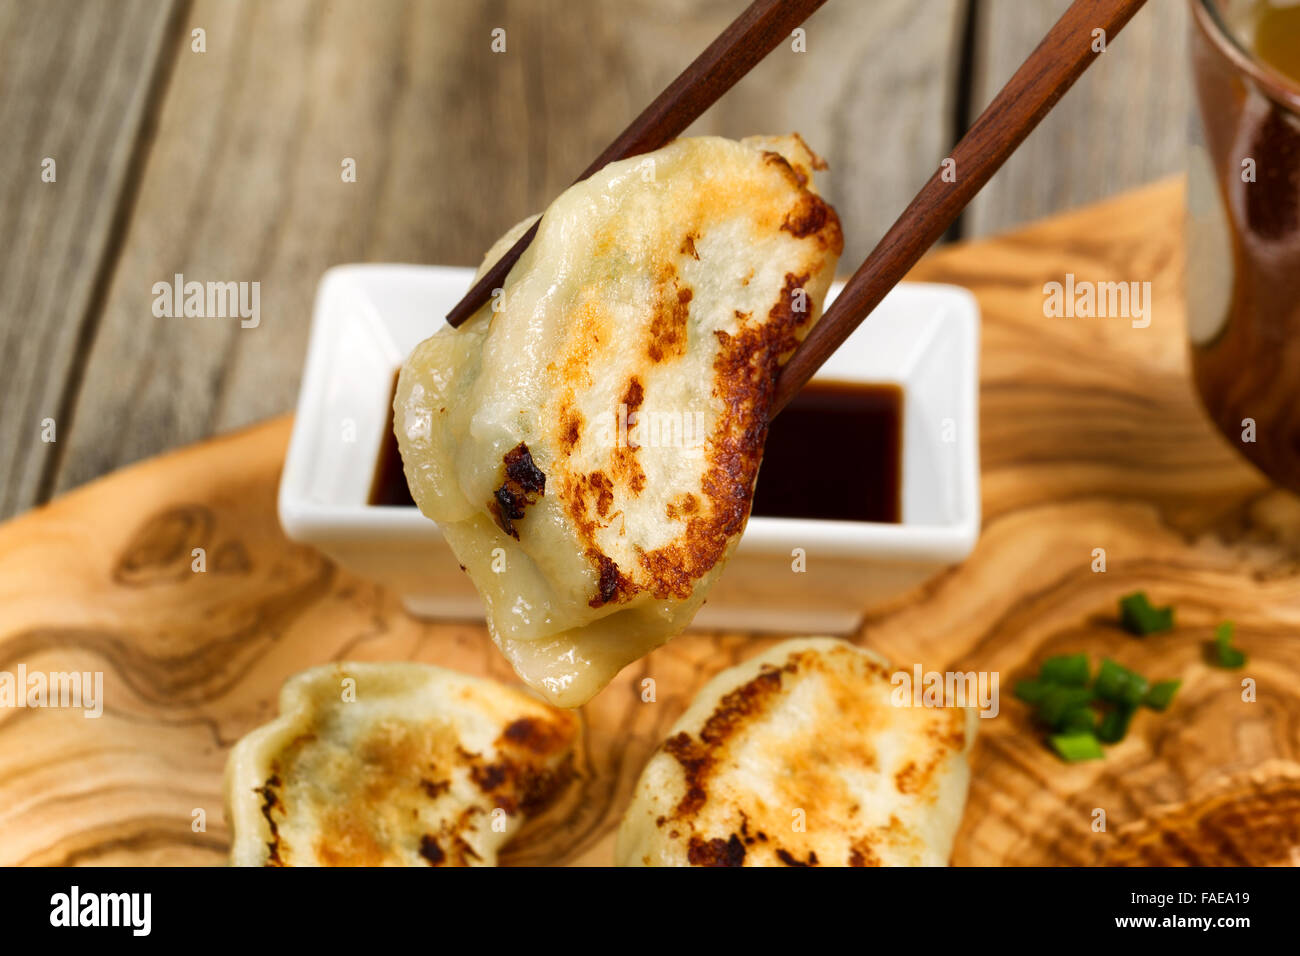 Close up view of chopsticks pickup up single cooked Chinese dumpling with soy sauce and tea in background. Stock Photo